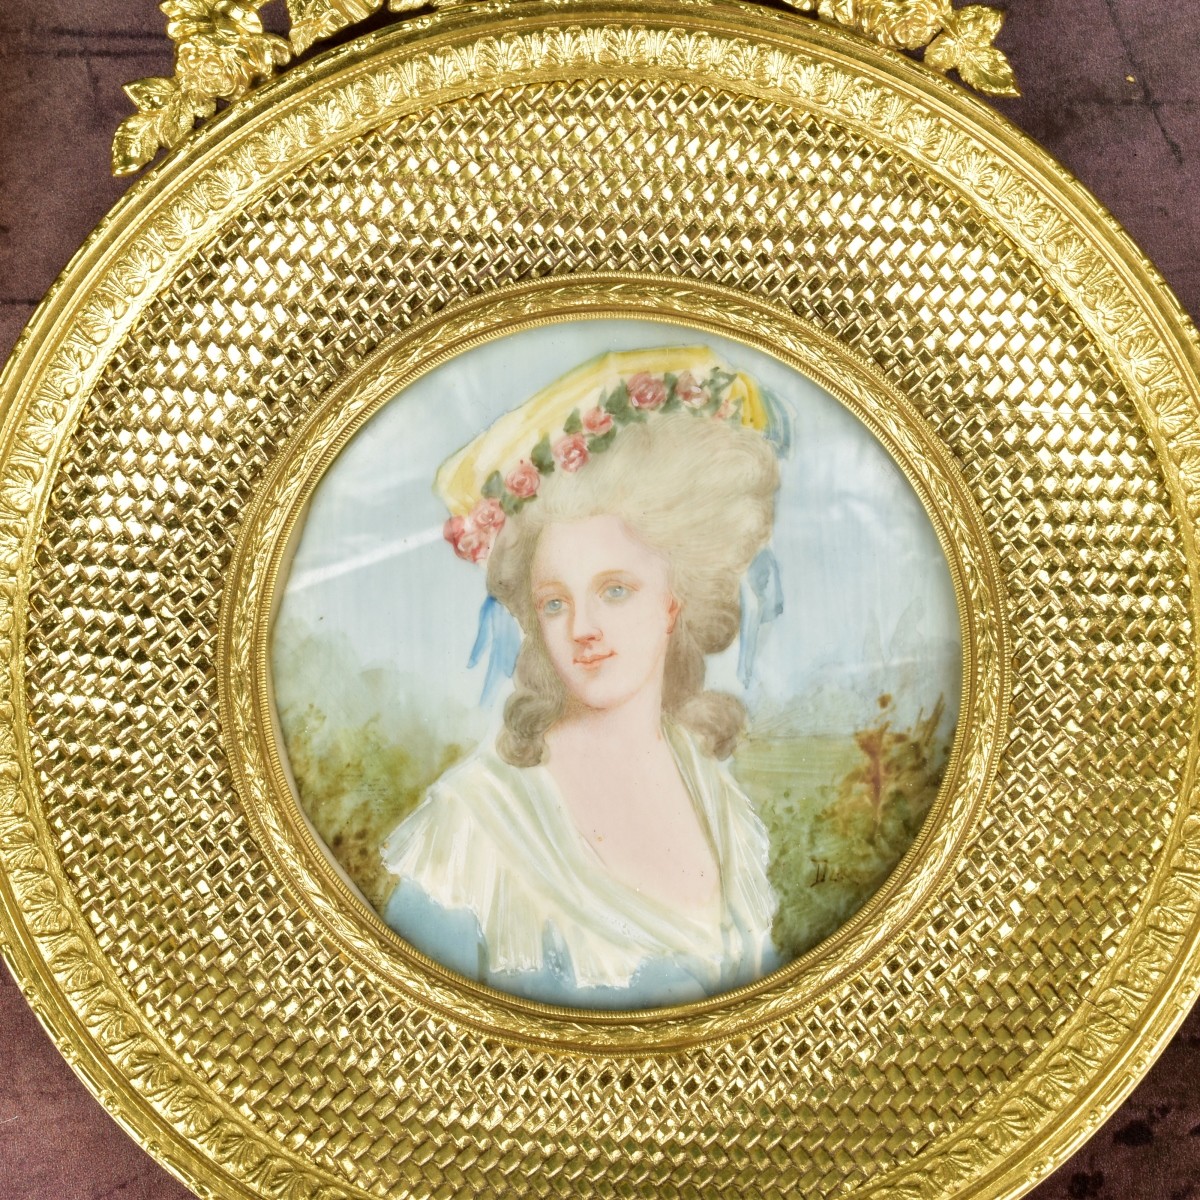 Pair of Victorian Style Miniature Portraits